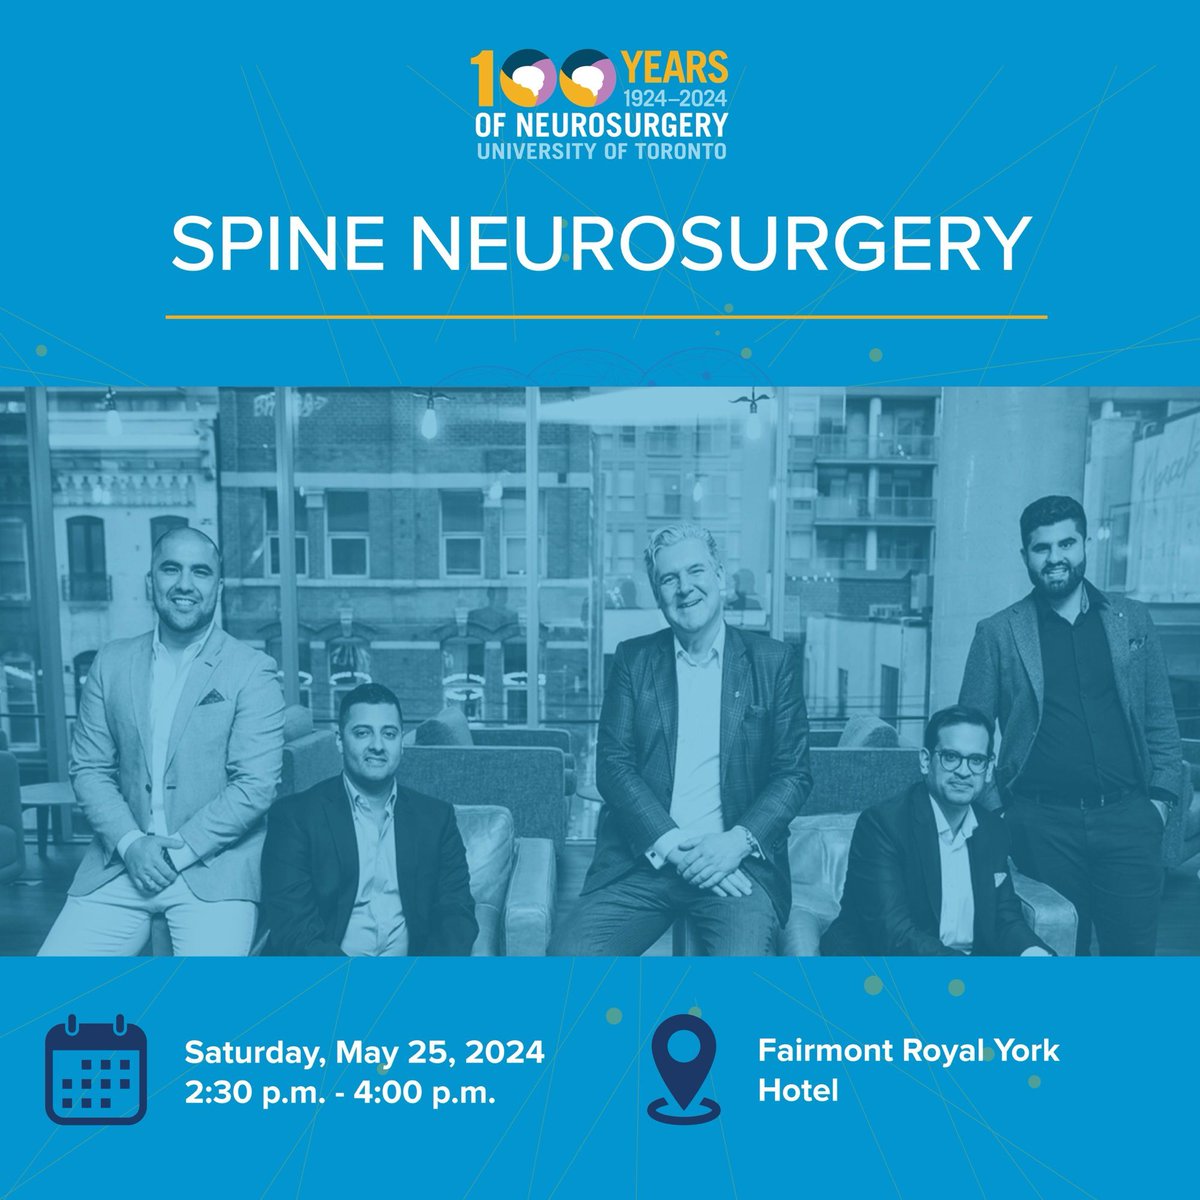 Our upcoming #SpineNeurosurgery session includes: ⭐️ @UofT NSX History ⭐️ Motion Preservation #SpinalSurgery ⭐️ Improving Successful Translation of Animal Spinal Cord and Brain Regeneration Therapies to Humans? ⭐️ The Future bit.ly/4aQgwLo